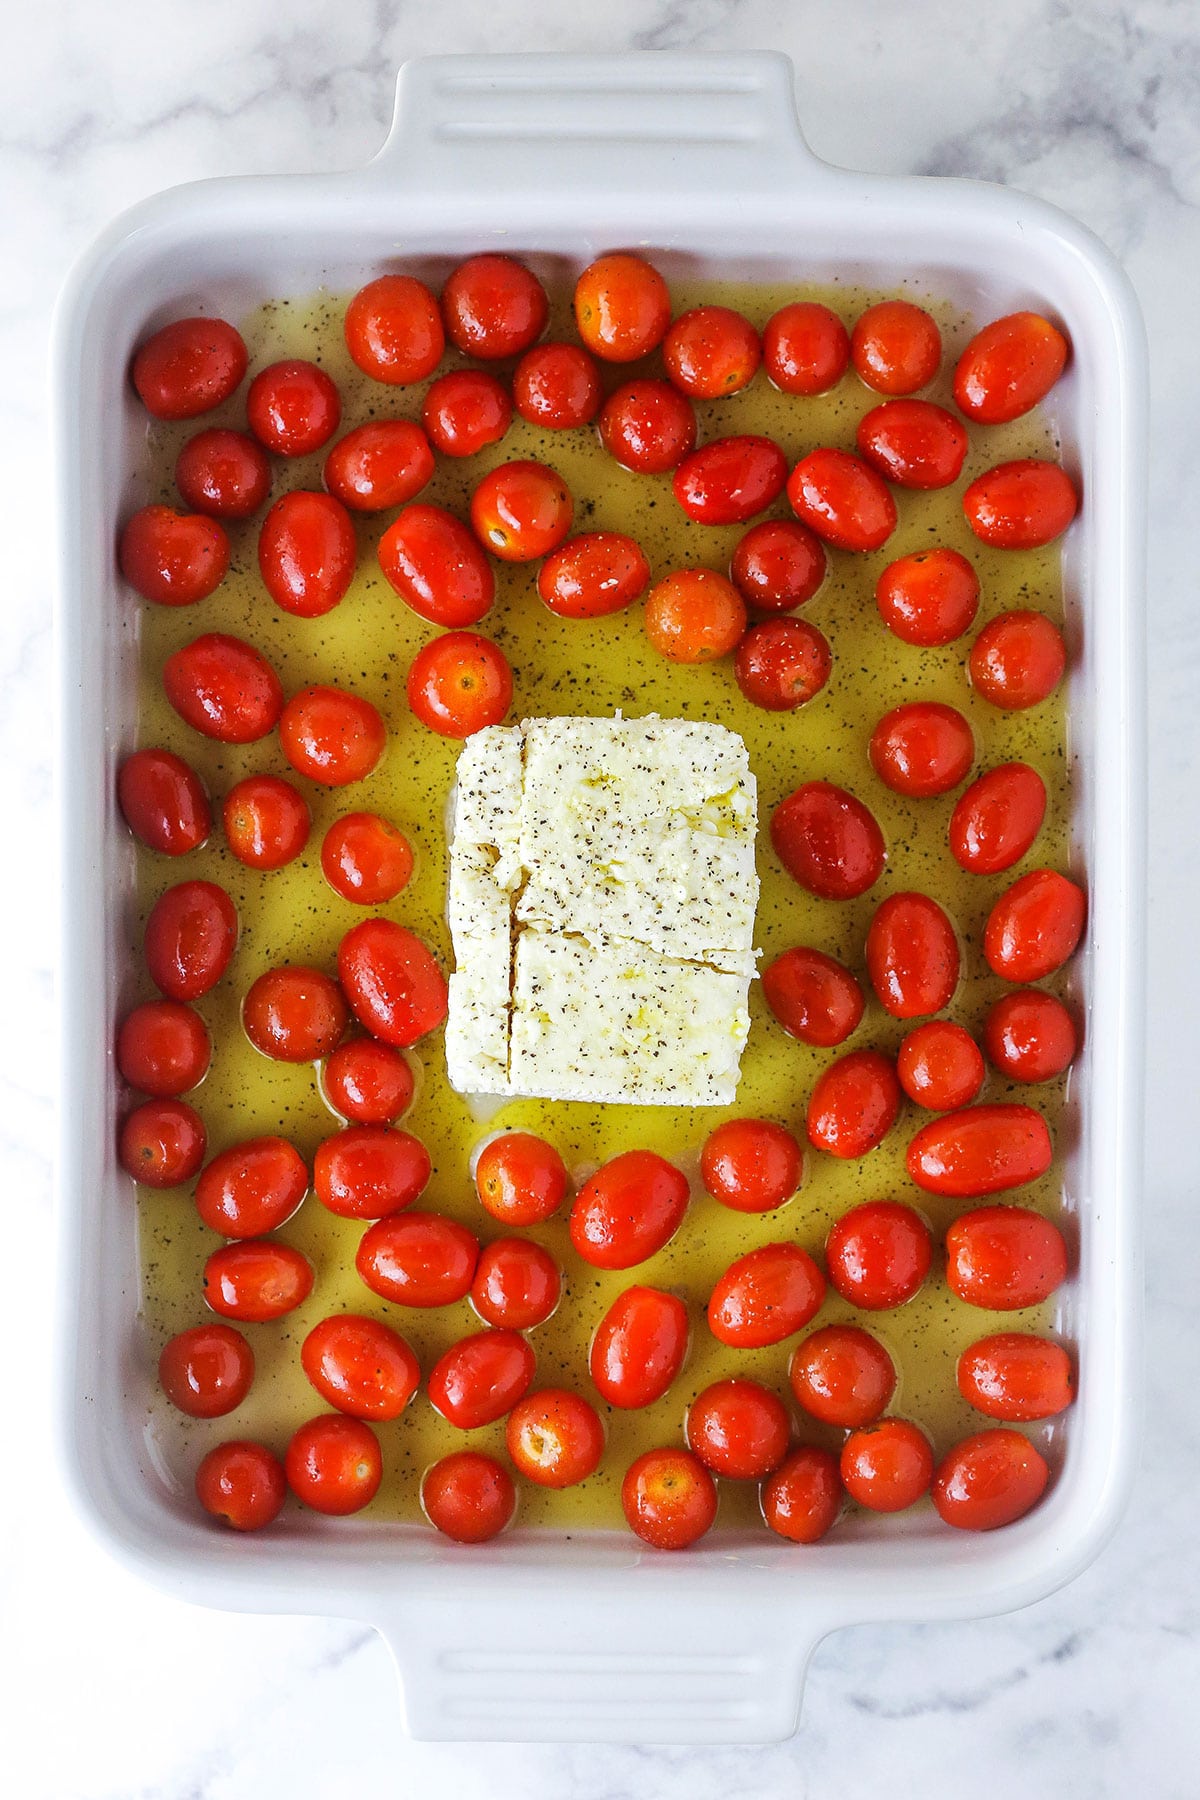 Extra virgin olive oil, salt, pepper and cherry tomatoes surrounding a block of feta cheese in a baking dish